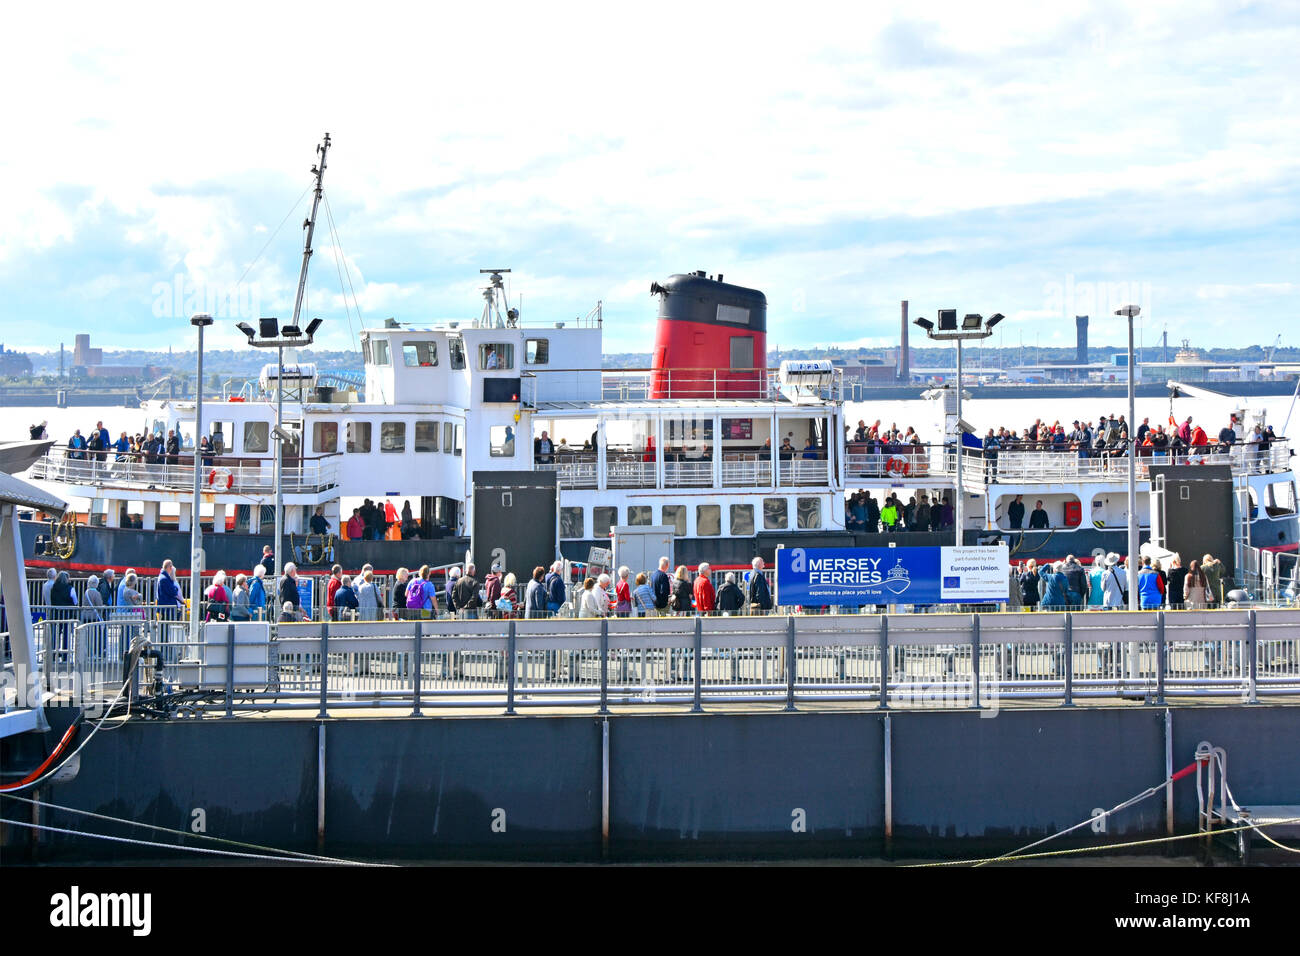 Liverpool Mersey Ferries Royal Iris of The Mersey at  Pier Head with crowds of people waiting to disembark & many others wait to board England UK Stock Photo